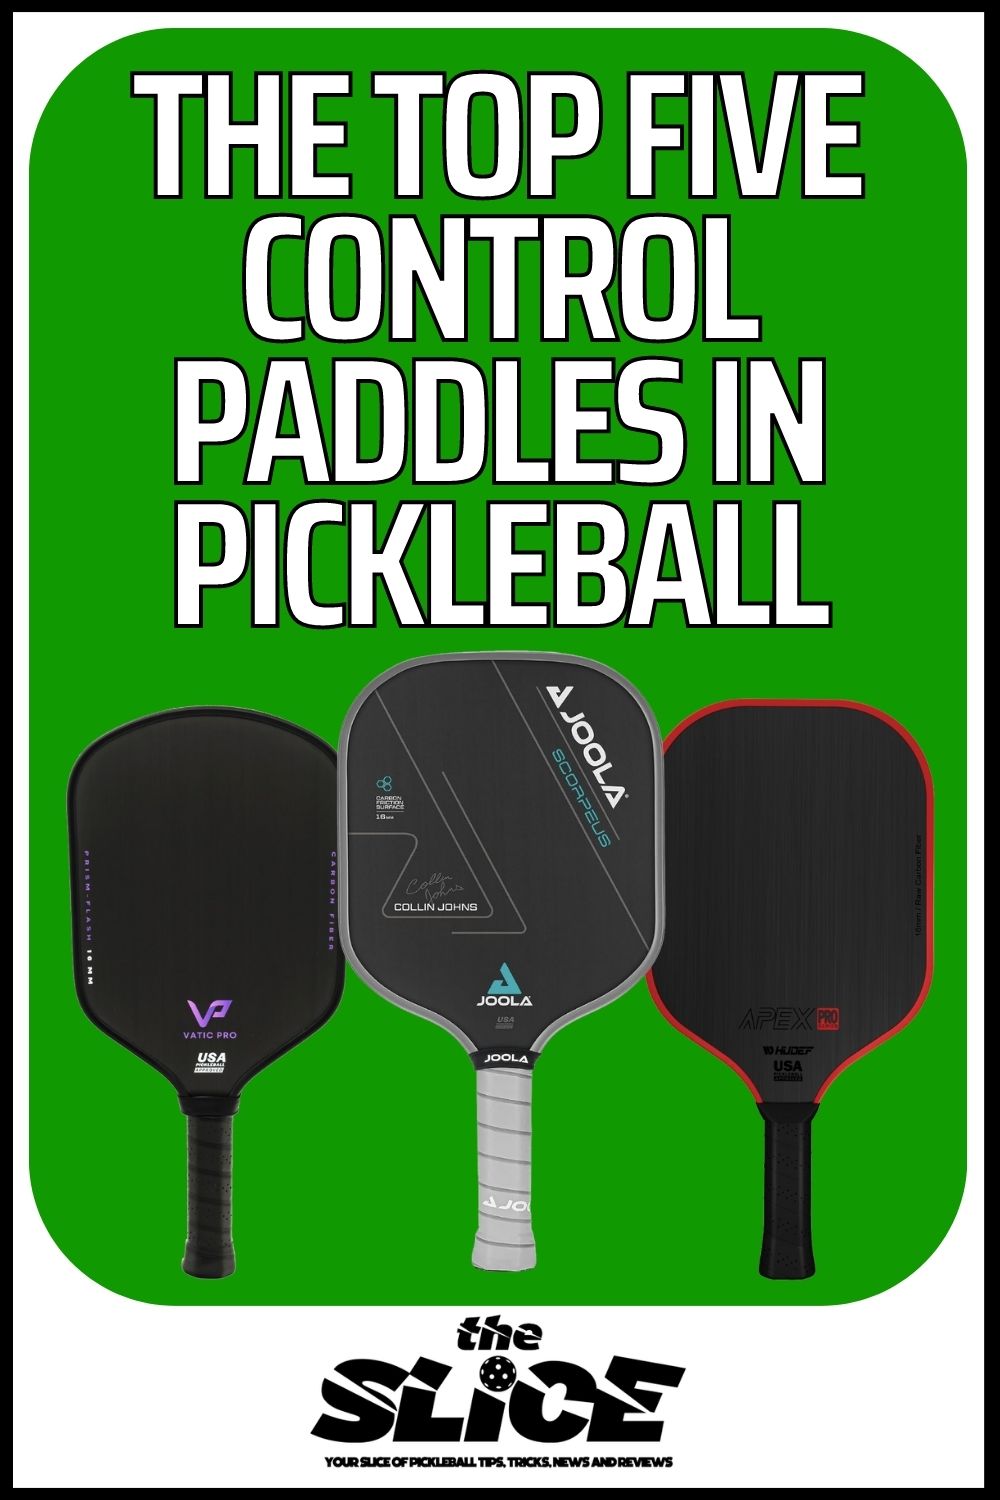 Top Five Control Paddles In Pickleball